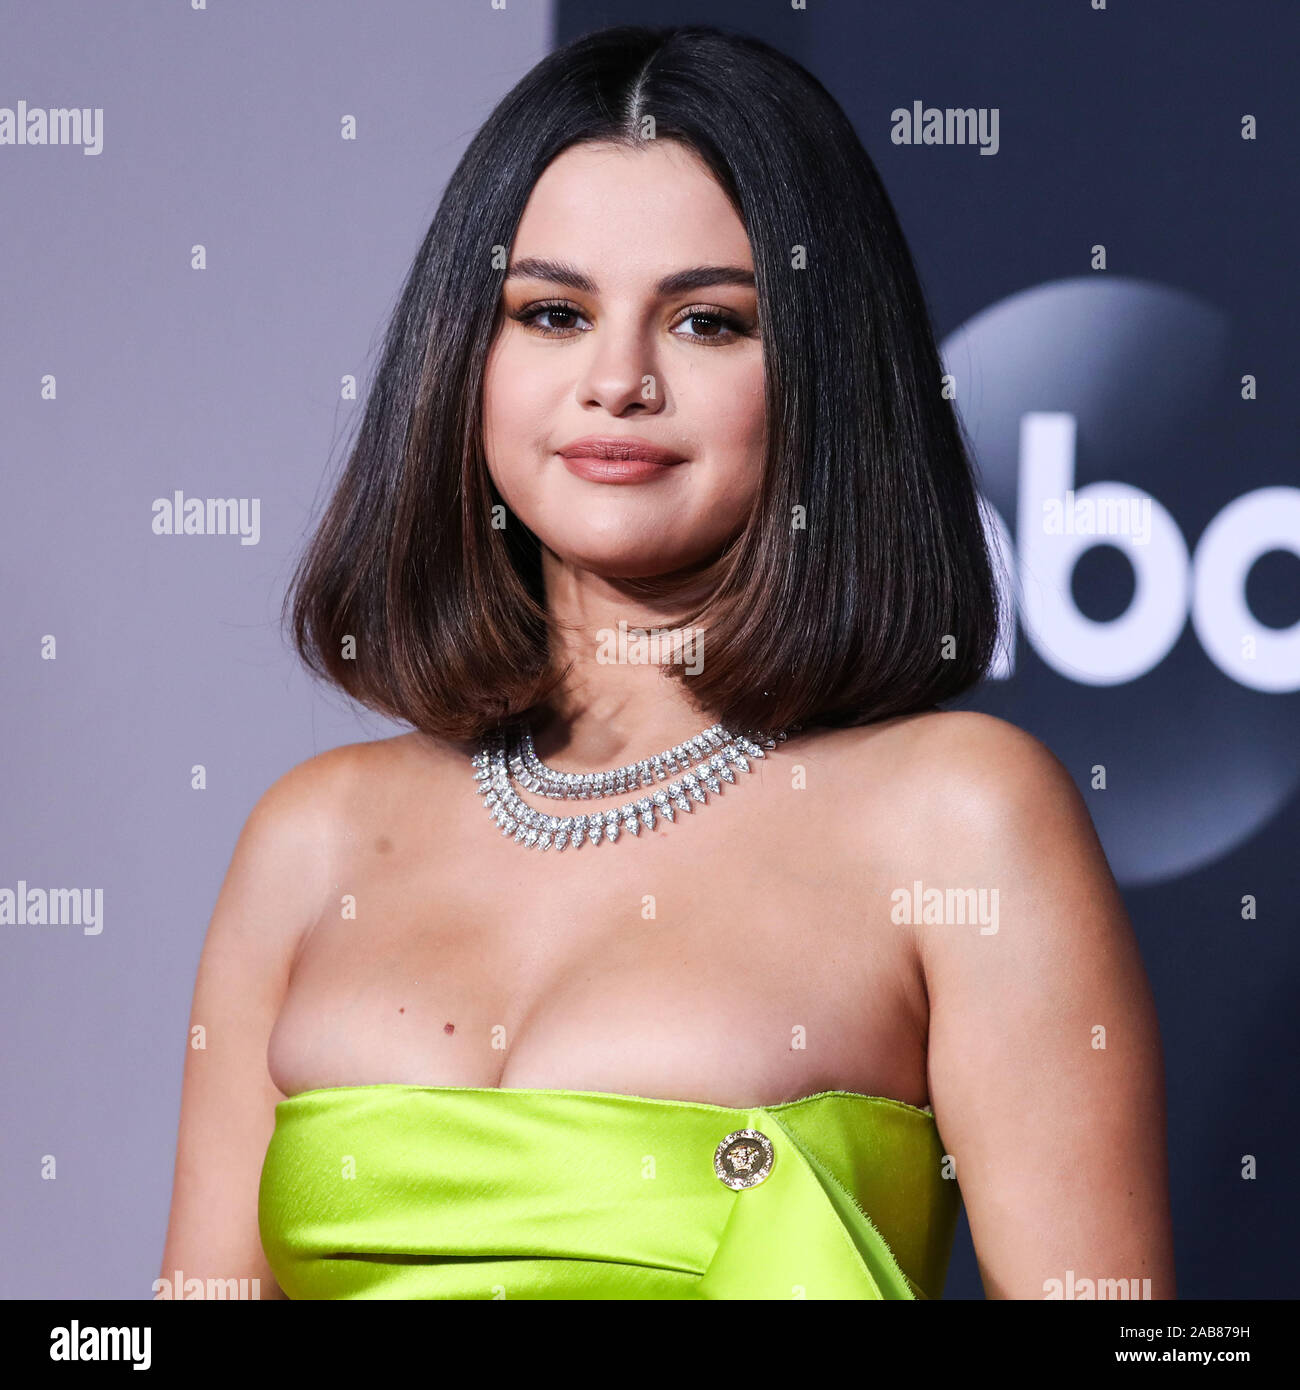 LOS ANGELES, CALIFORNIA, USA - NOVEMBER 24: Singer Selena Gomez wearing a Versace dress and shoes with Roberto Coin jewelry arrives at the 2019 American Music Awards held at Microsoft Theatre L.A. Live on November 24, 2019 in Los Angeles, California, United States. (Photo by Xavier Collin/Image Press Agency) Stock Photo